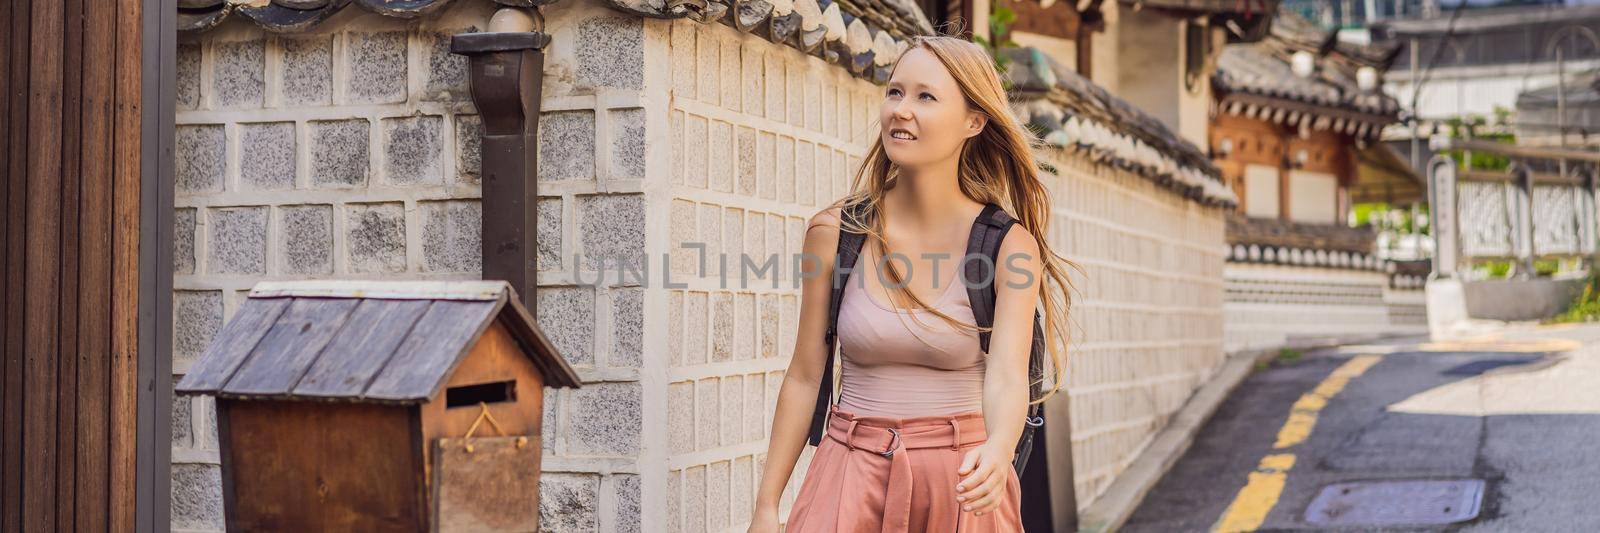 Young woman tourist in Bukchon Hanok Village is one of the famous place for Korean traditional houses have been preserved. Travel to Korea Concept. BANNER, LONG FORMAT